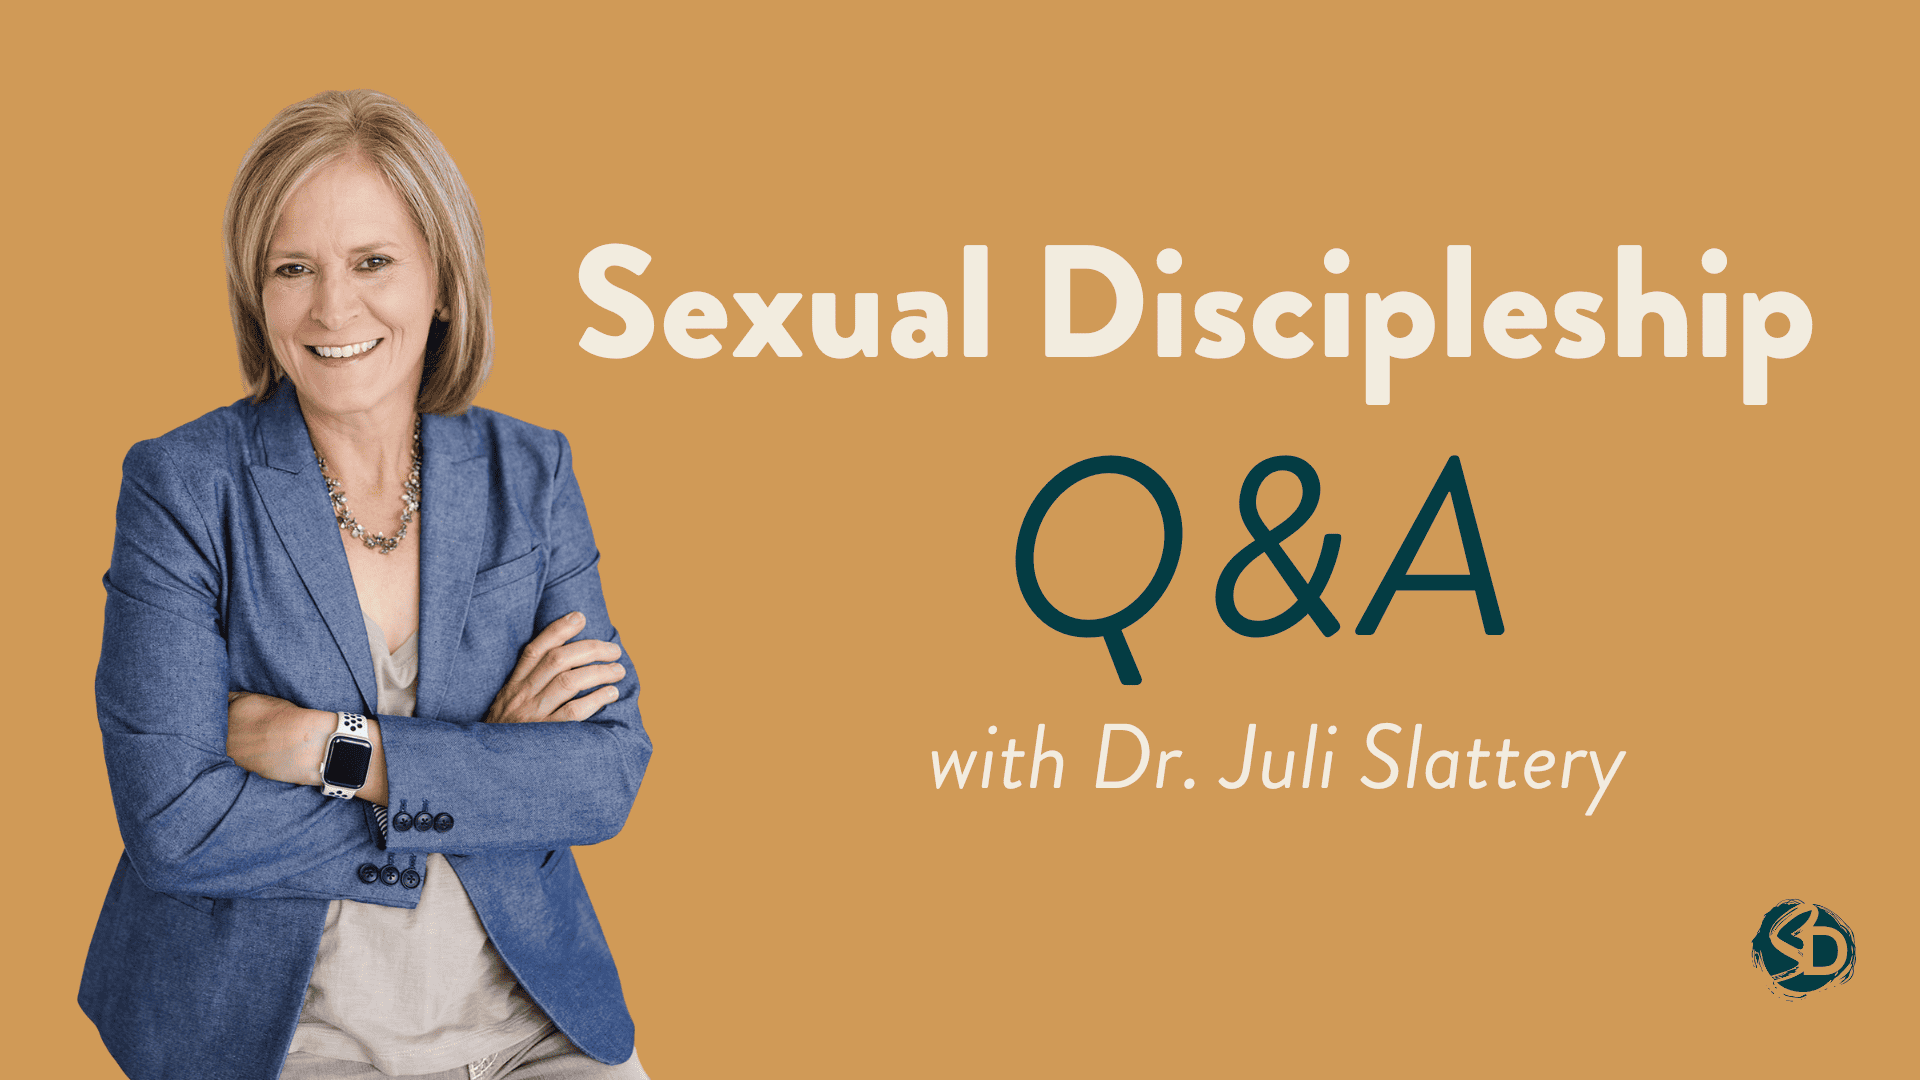 Q&A: How Can I Help Someone Through Longstanding Shame From Sexual Sin?